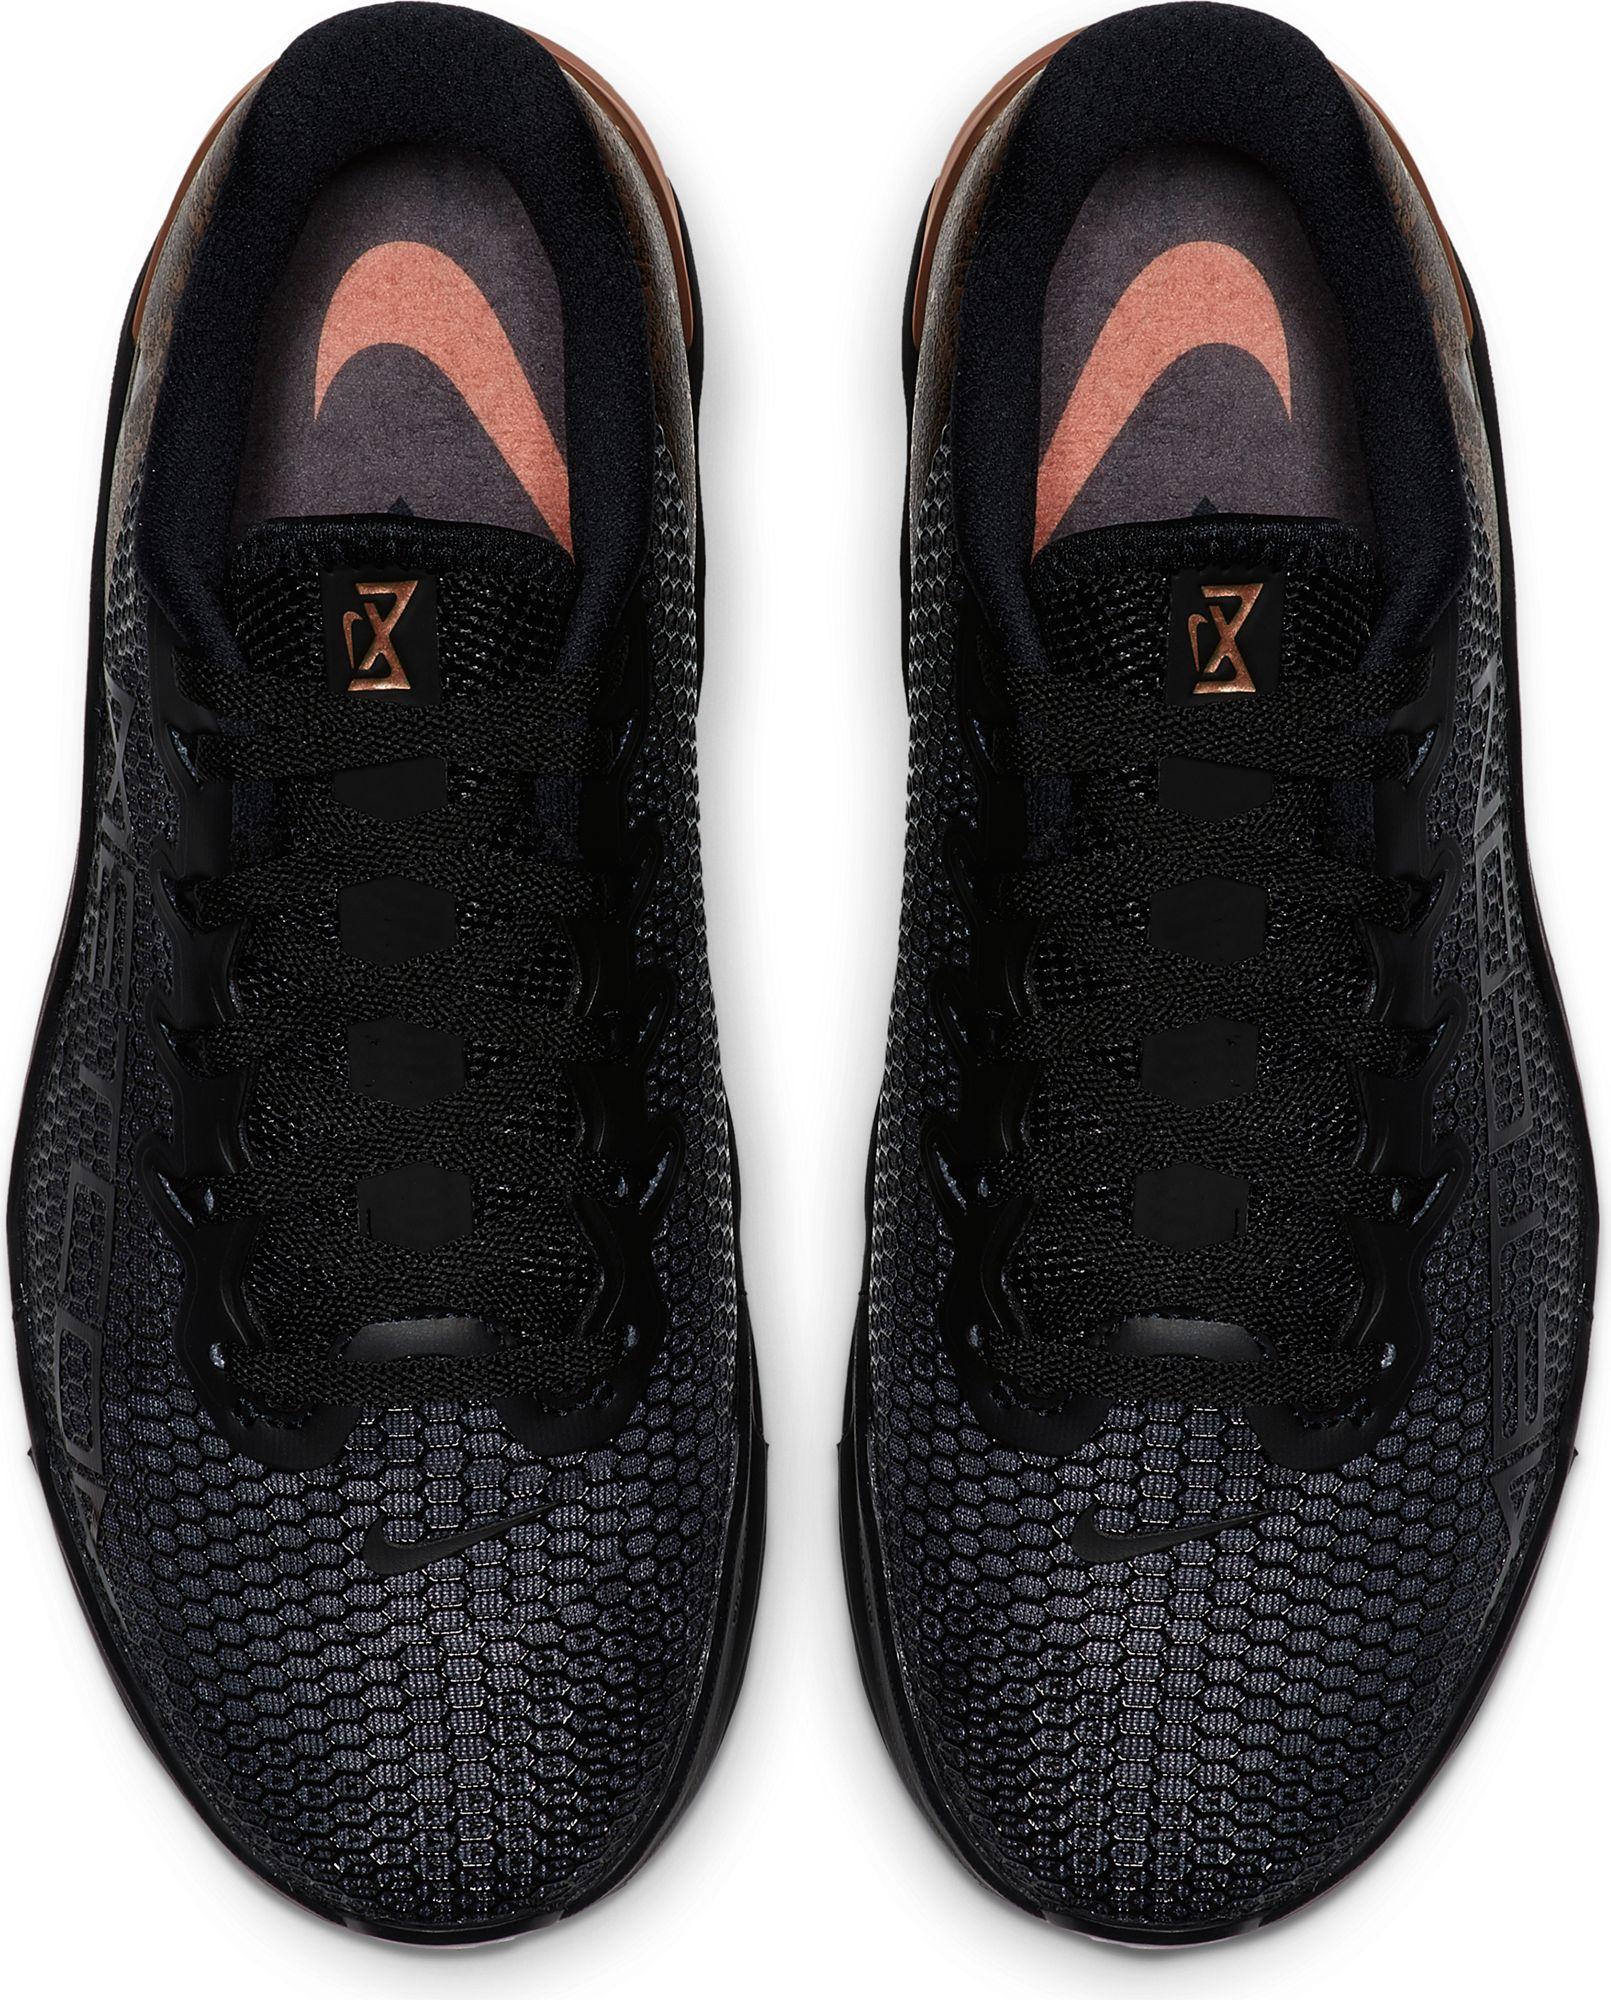 Nike Metcon 5 Black X Rose Gold Training Shoes - Lyst